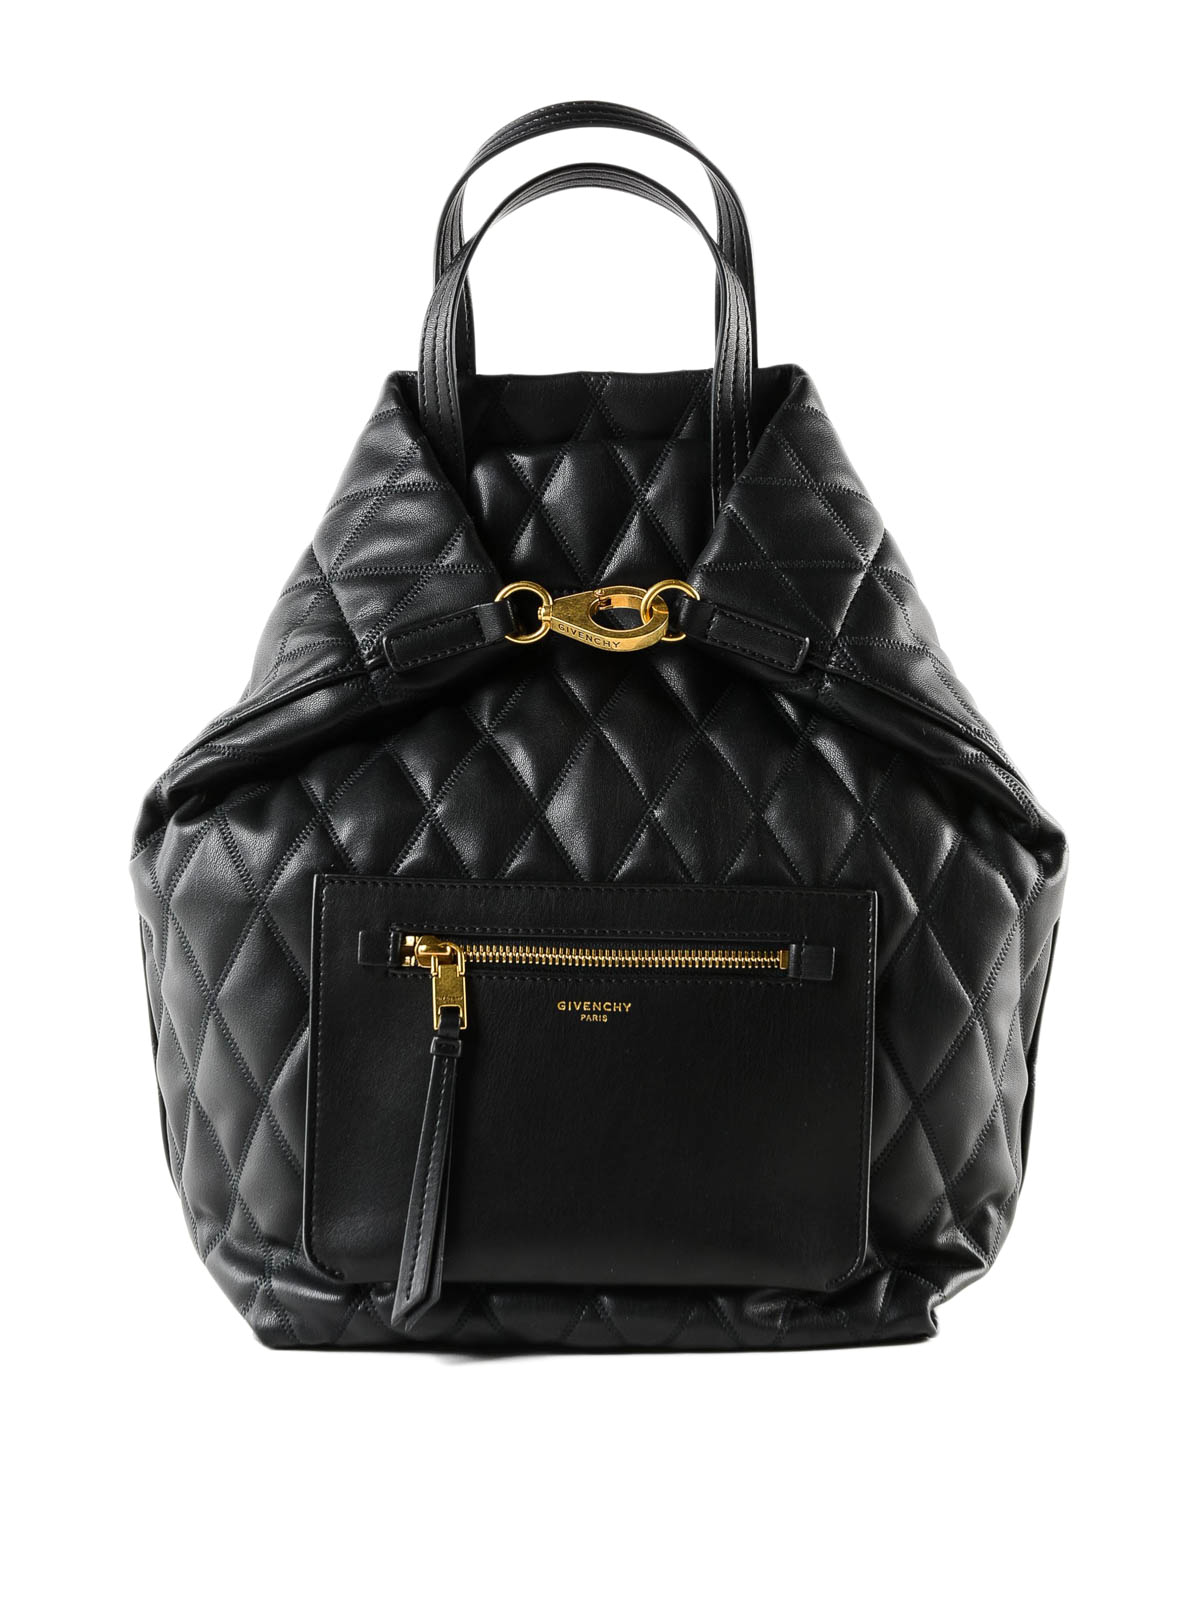 Givenchy - Duo quilted black backpack 